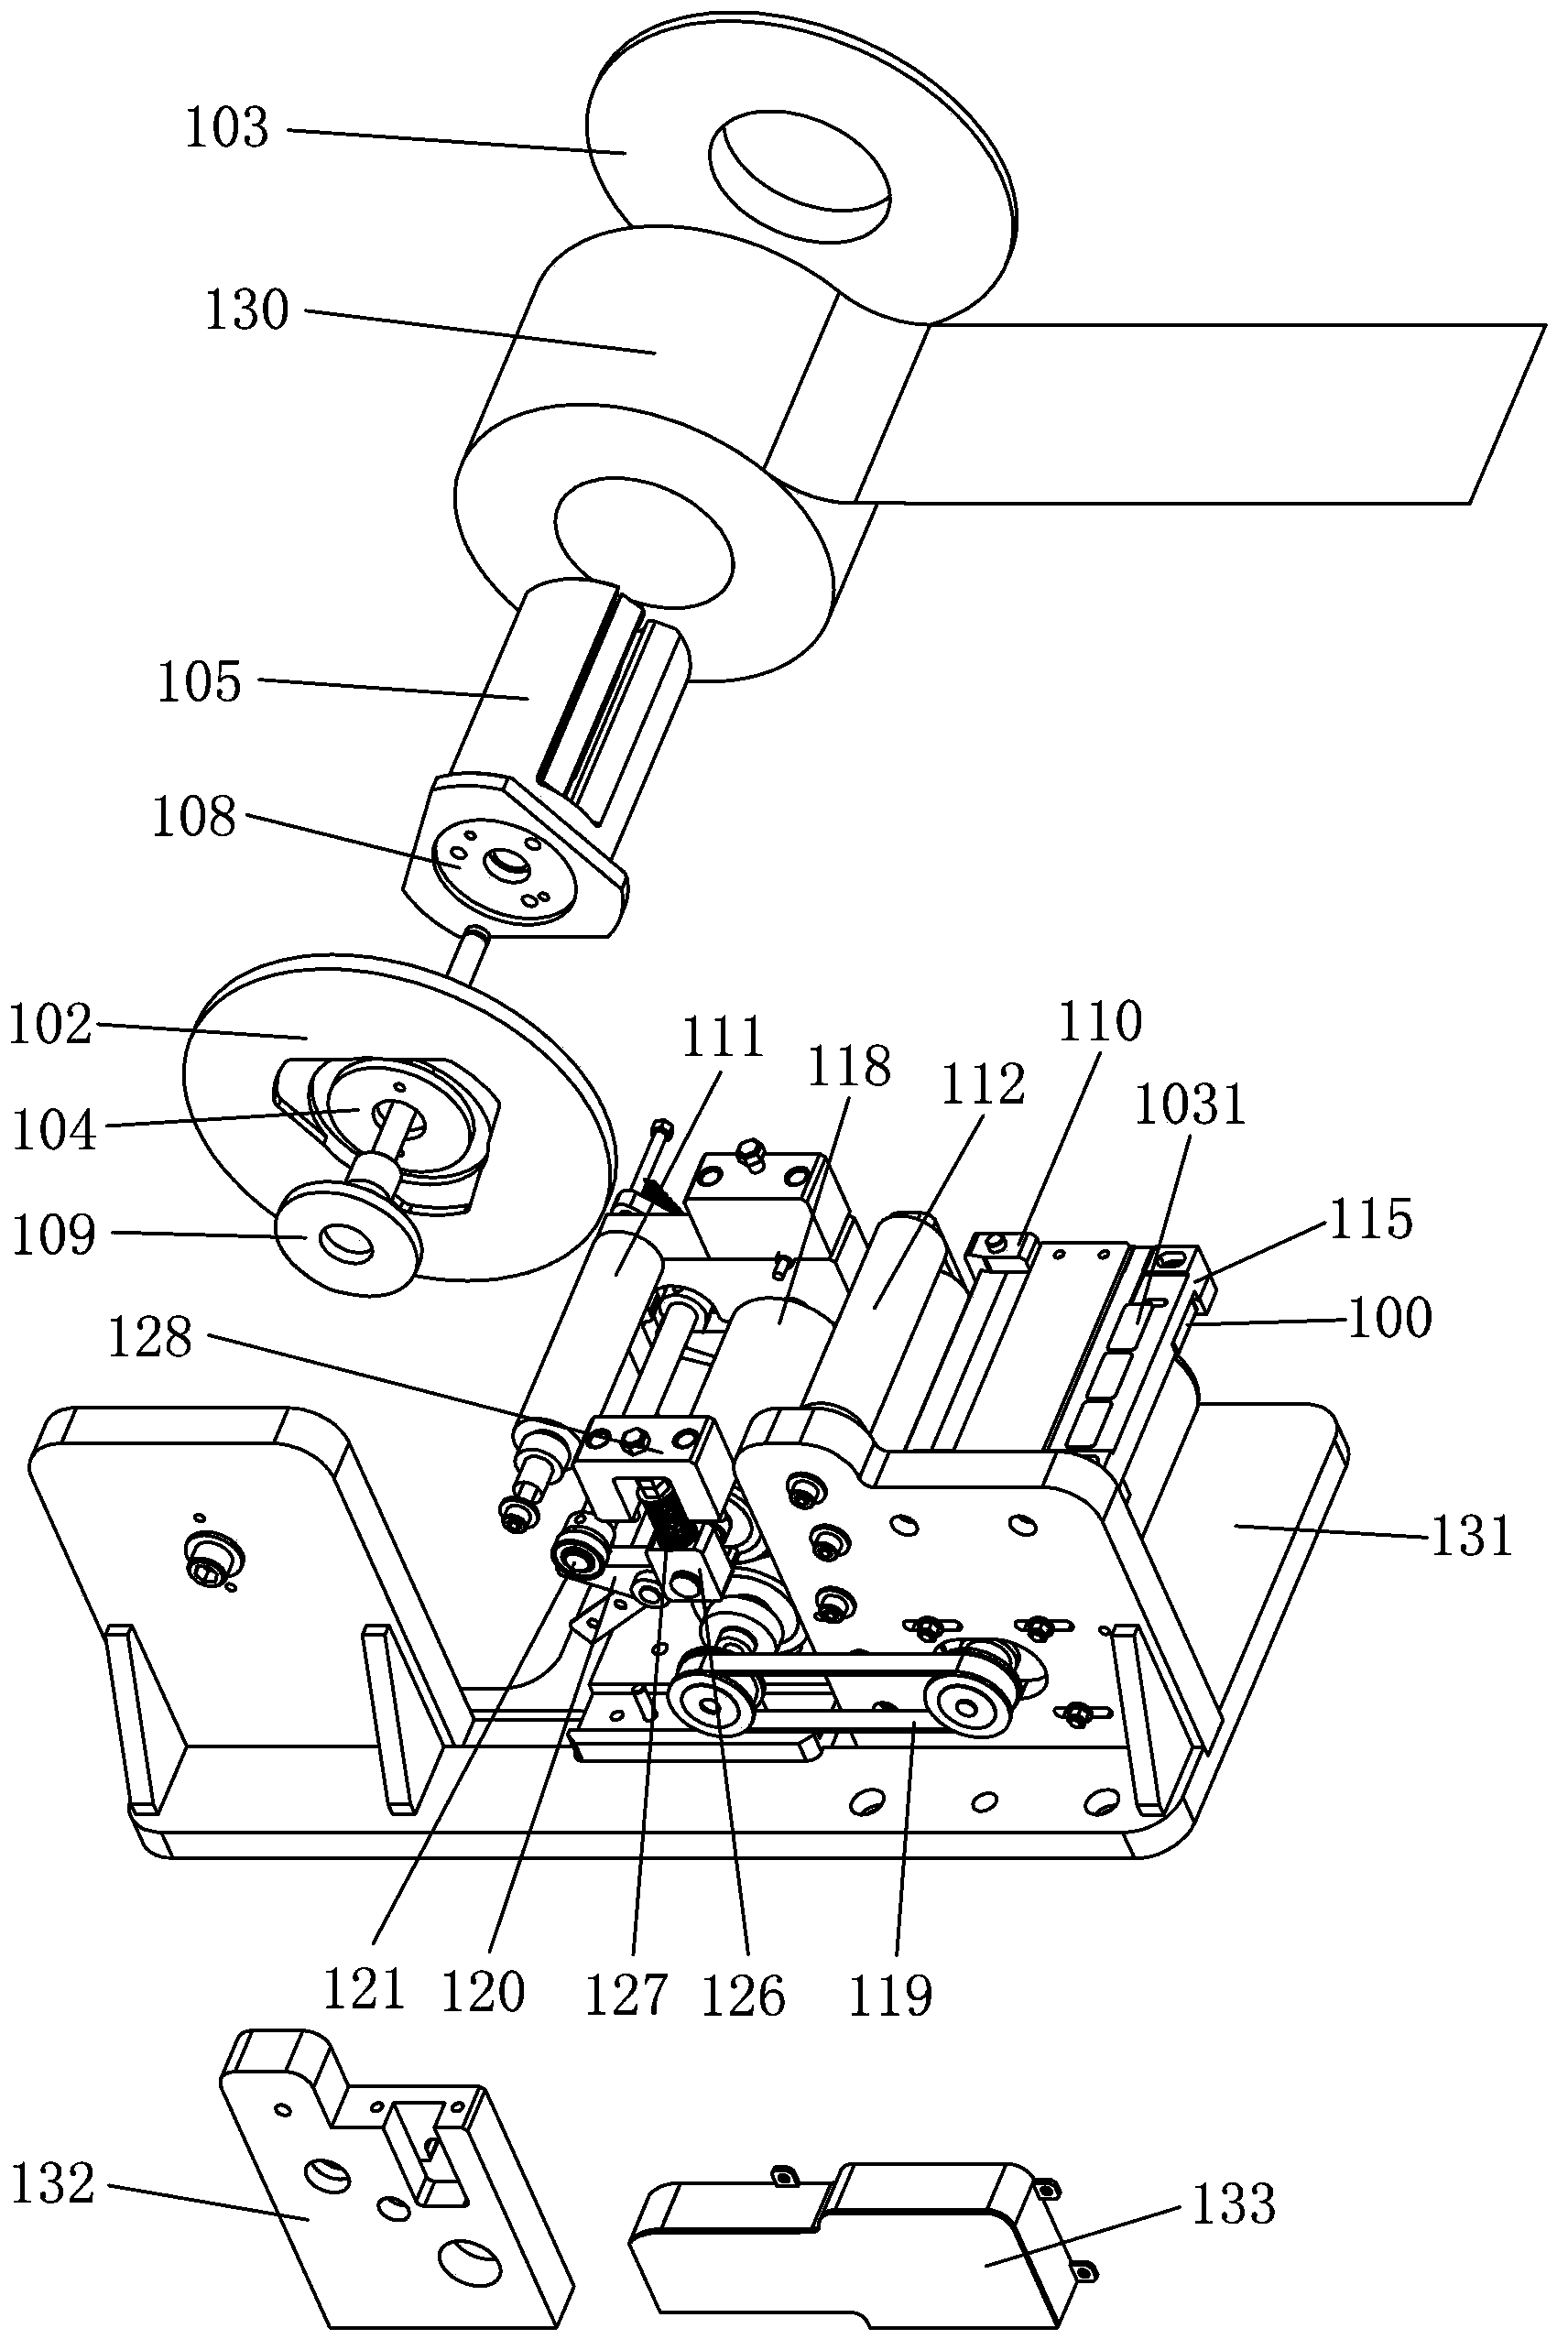 Automatic feeding and stripping mechanism